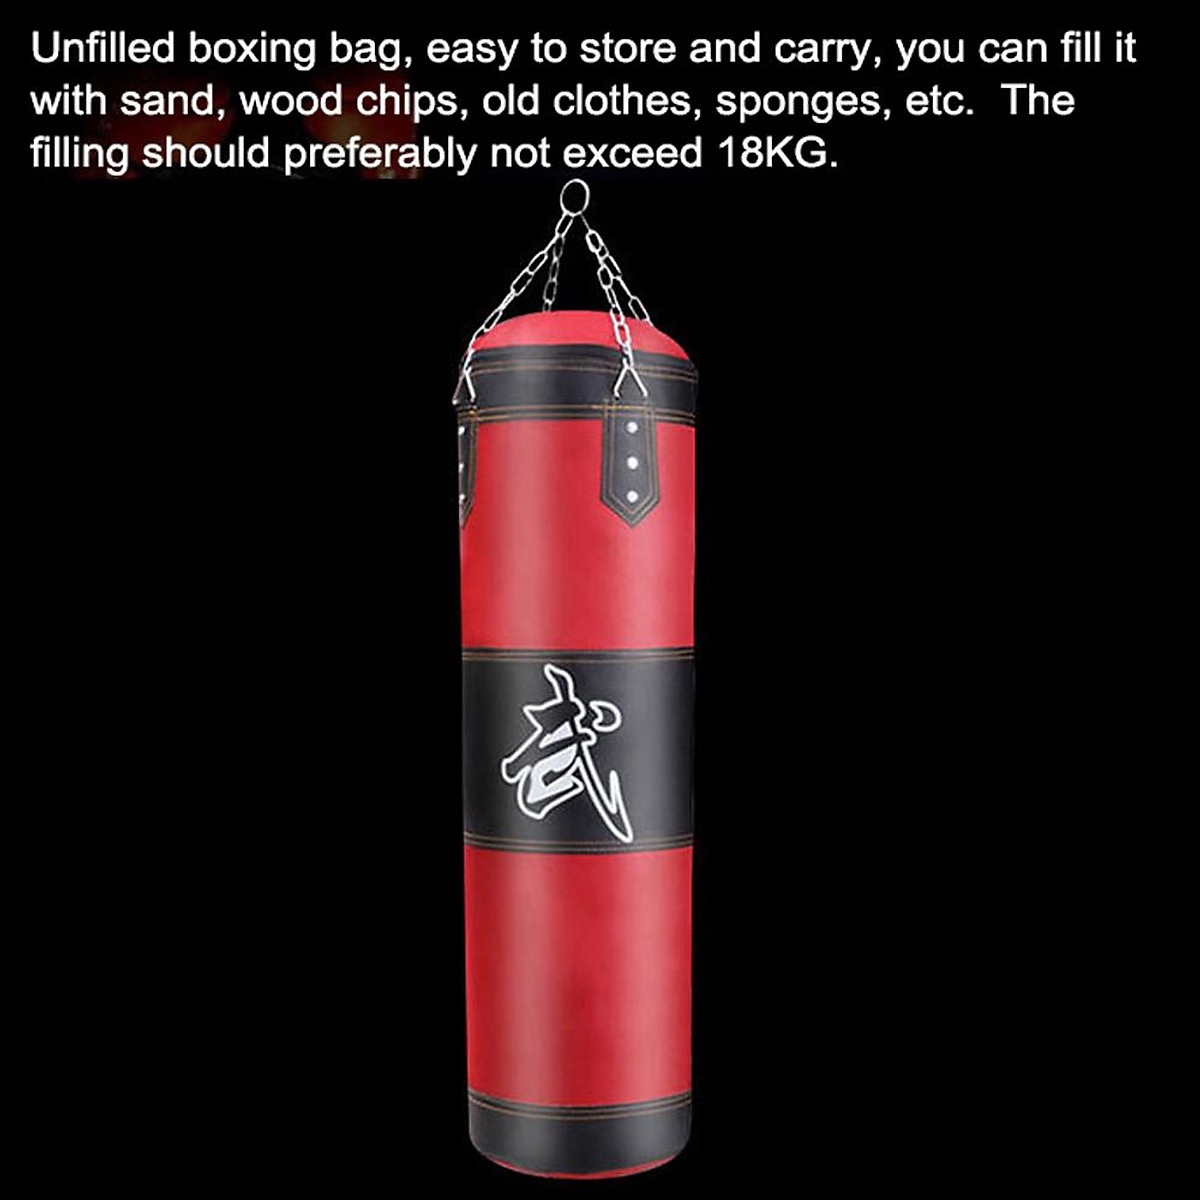 A Guide to Filling a Heavy Bag | TITLE Boxing | The Benefits of the  Unfilled Heavy Bag - YouTube